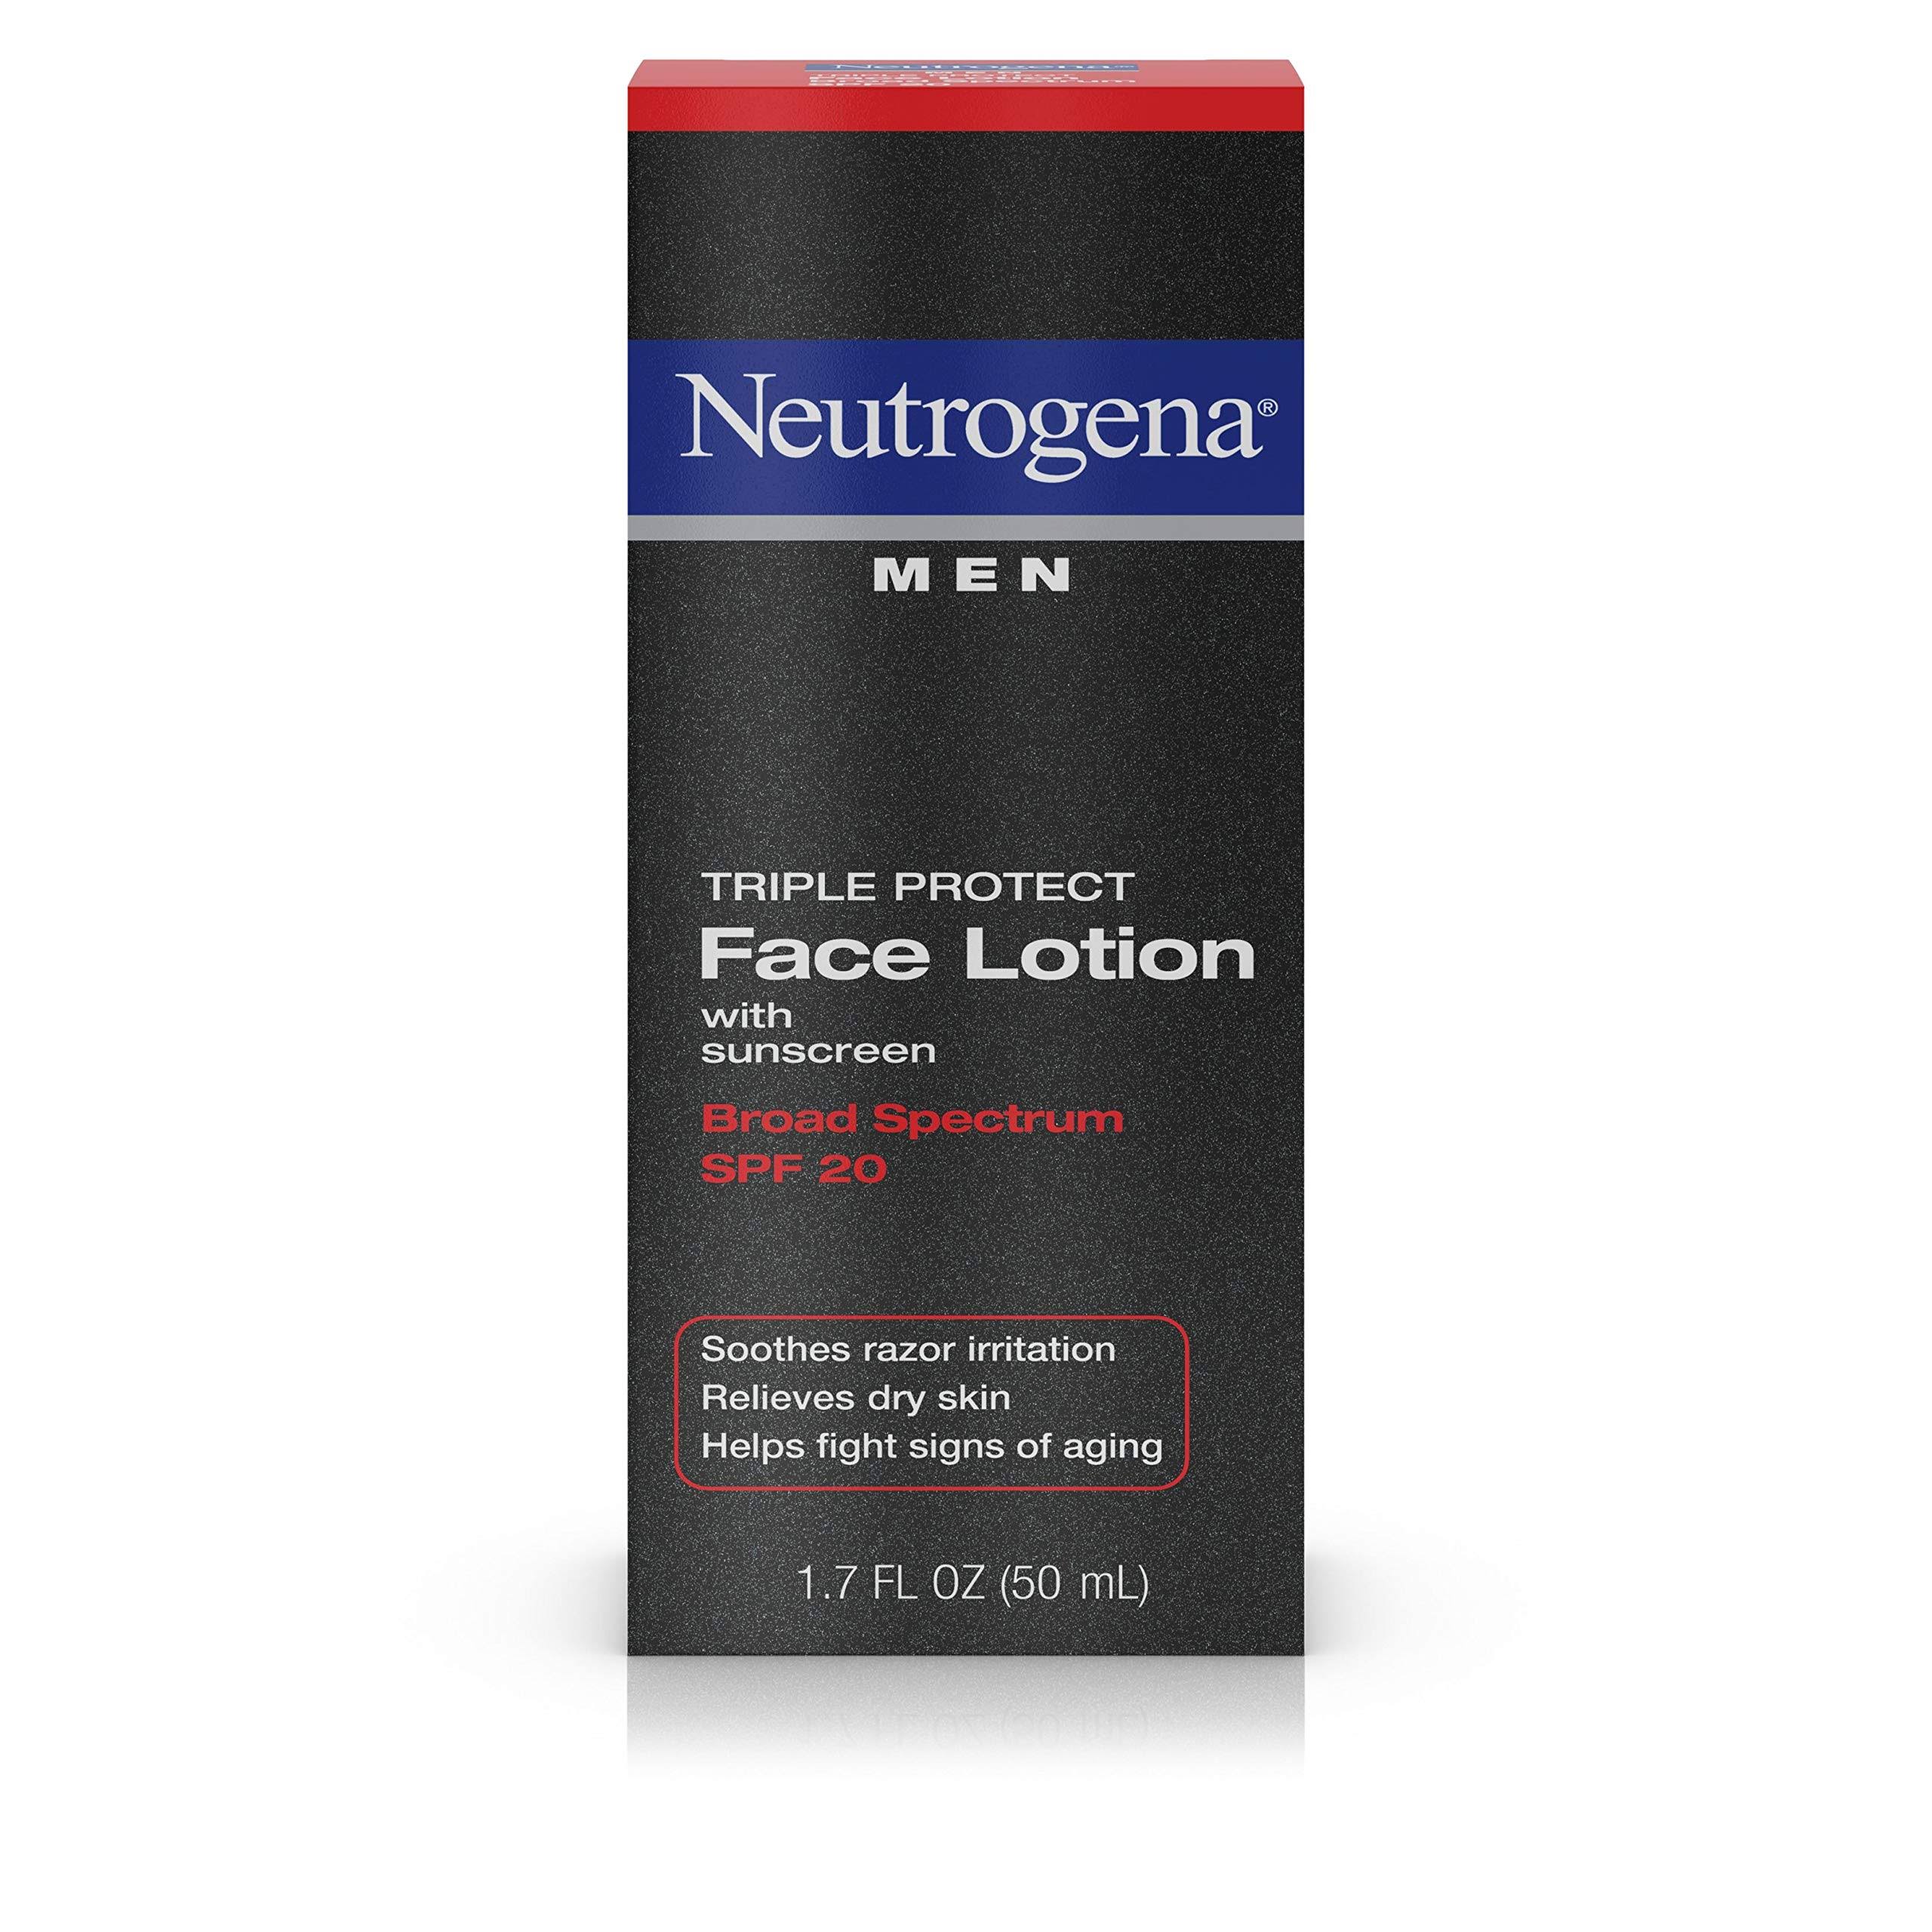 Neutrogena Men's Triple Protect Face Lotion - with Sunscreen, SPF 20, 50ml